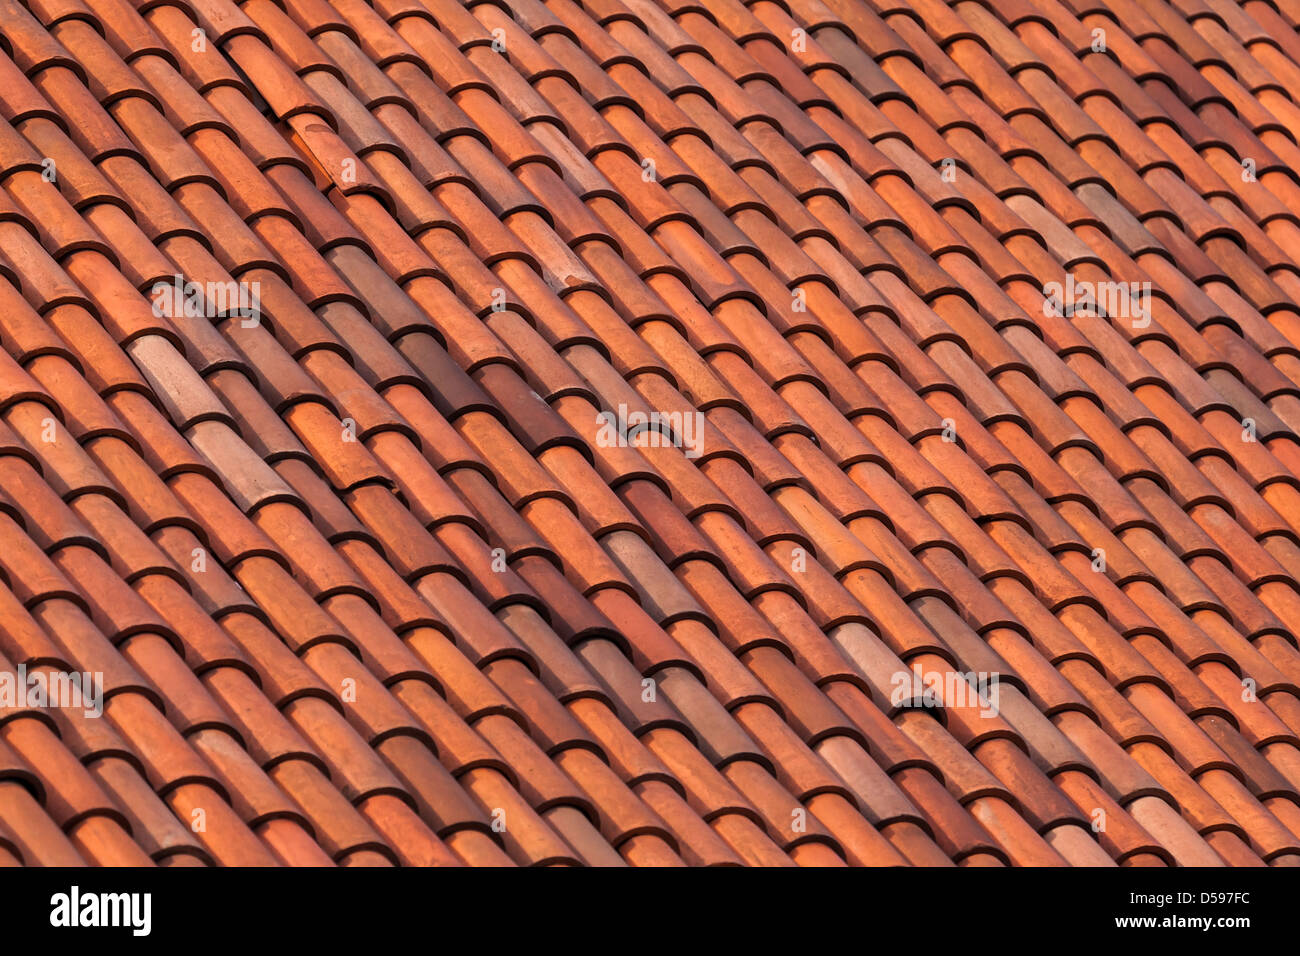 Old red slate tiles roof abstract background texture Stock Photo